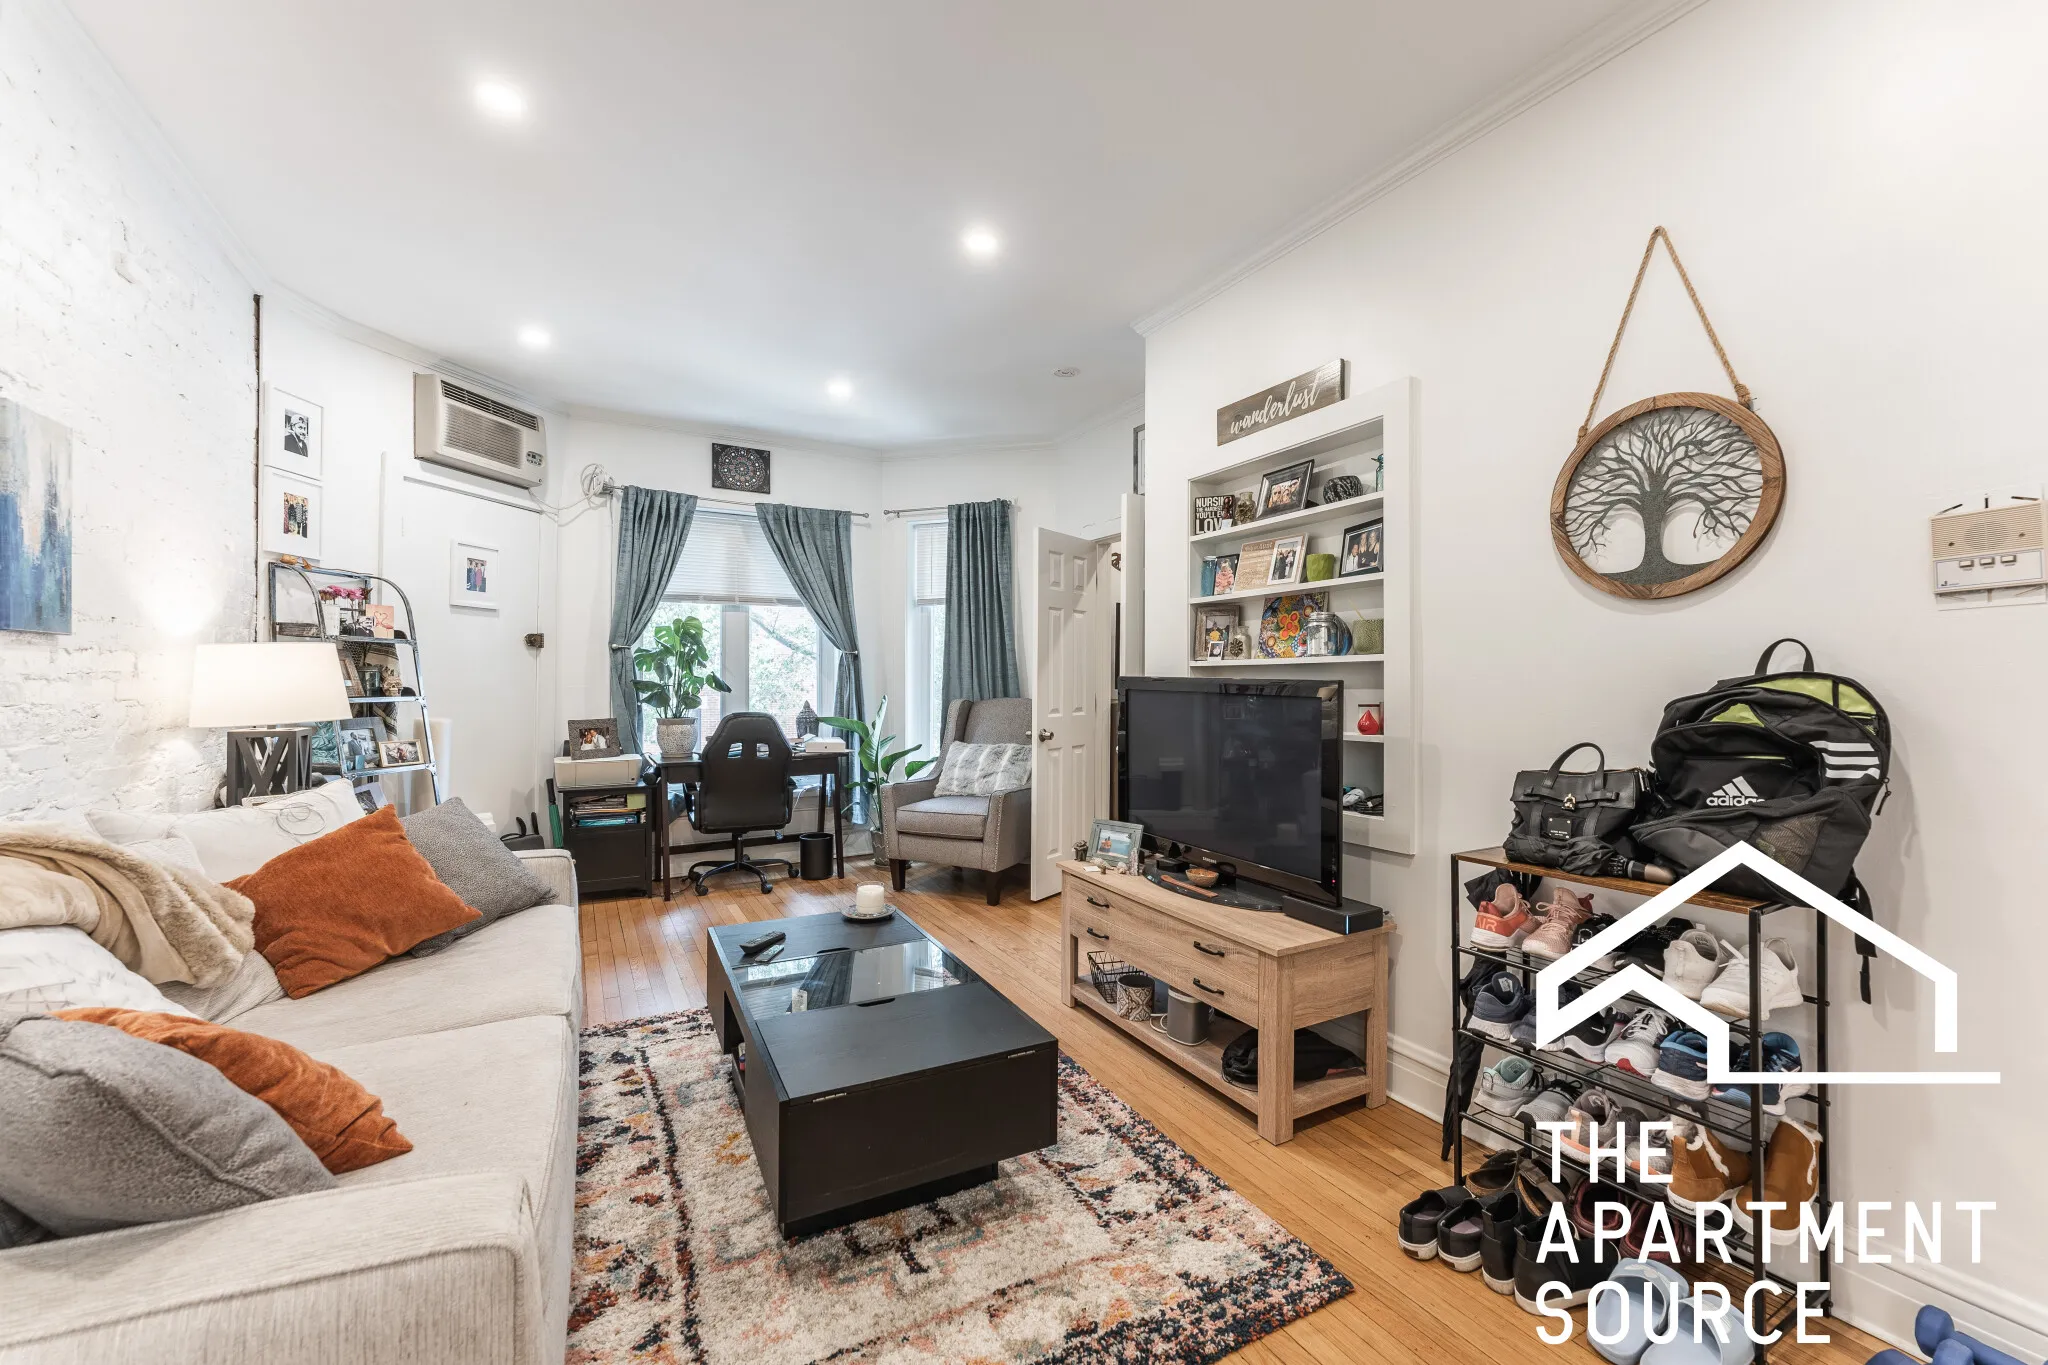 2252 N CLEVELAND AVE 60614-unit#2F-Chicago-IL